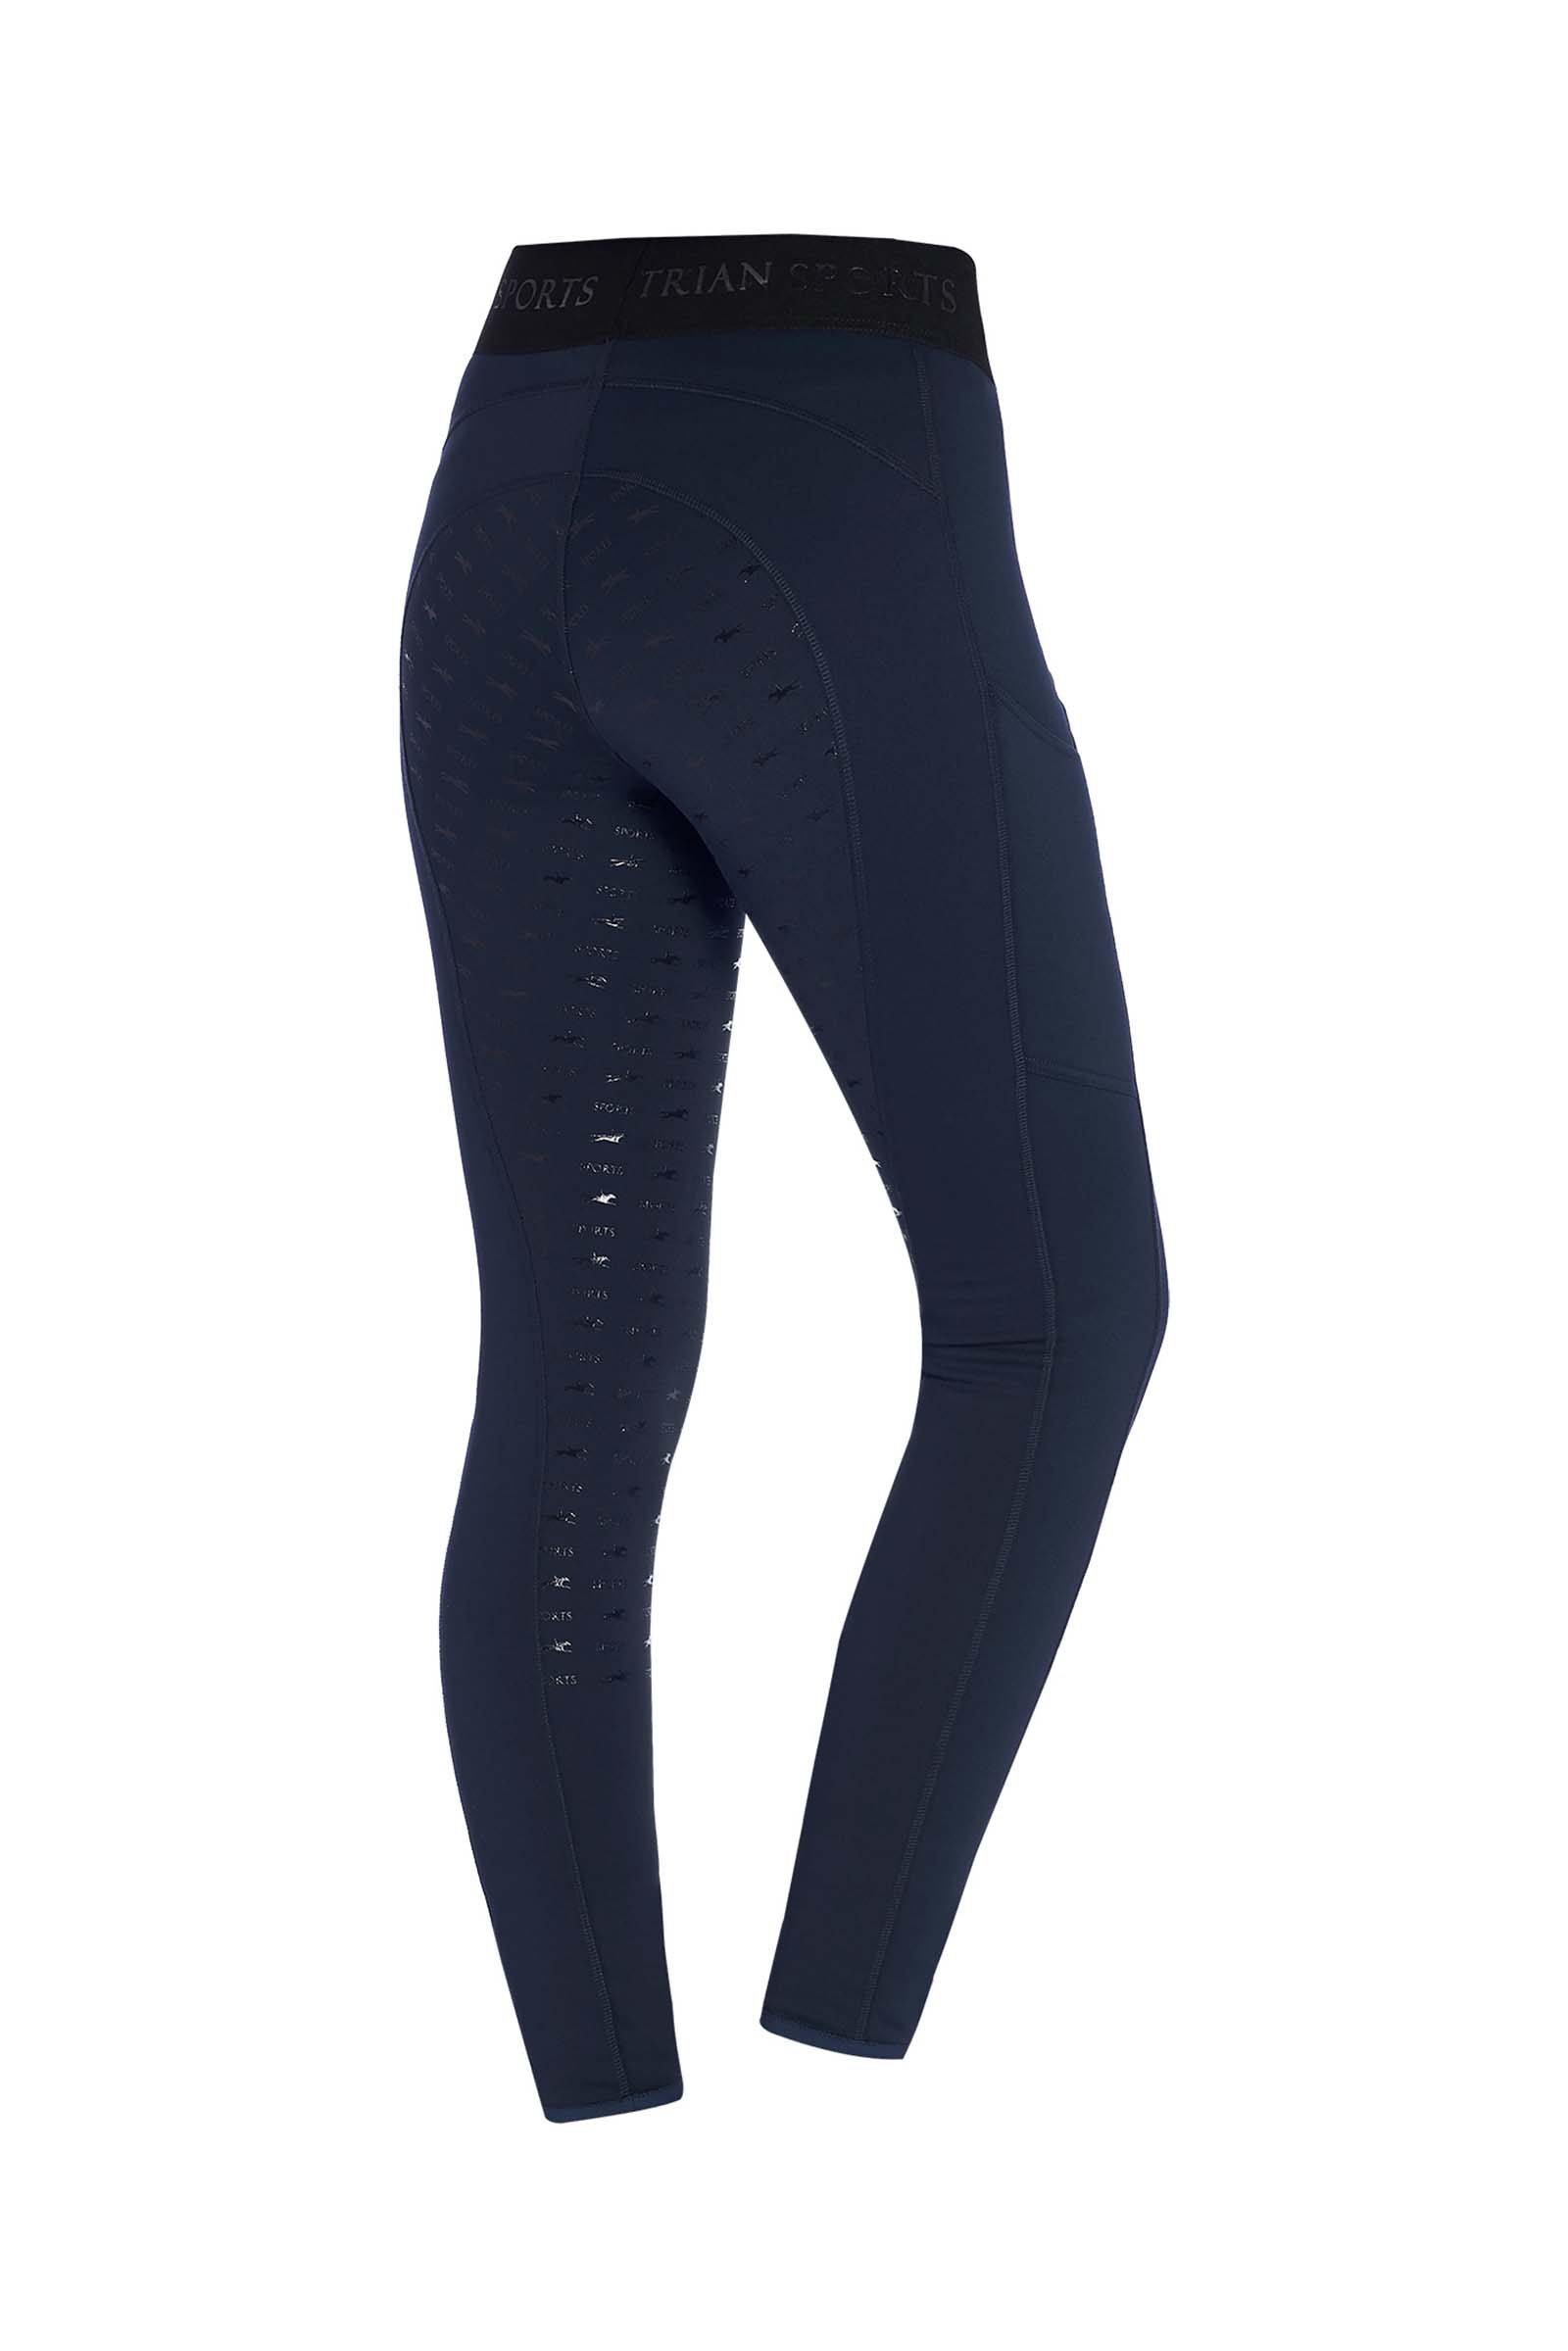 Schockemohle Sports Comfy Full Seat Style Riding Tights - Bahr Saddlery